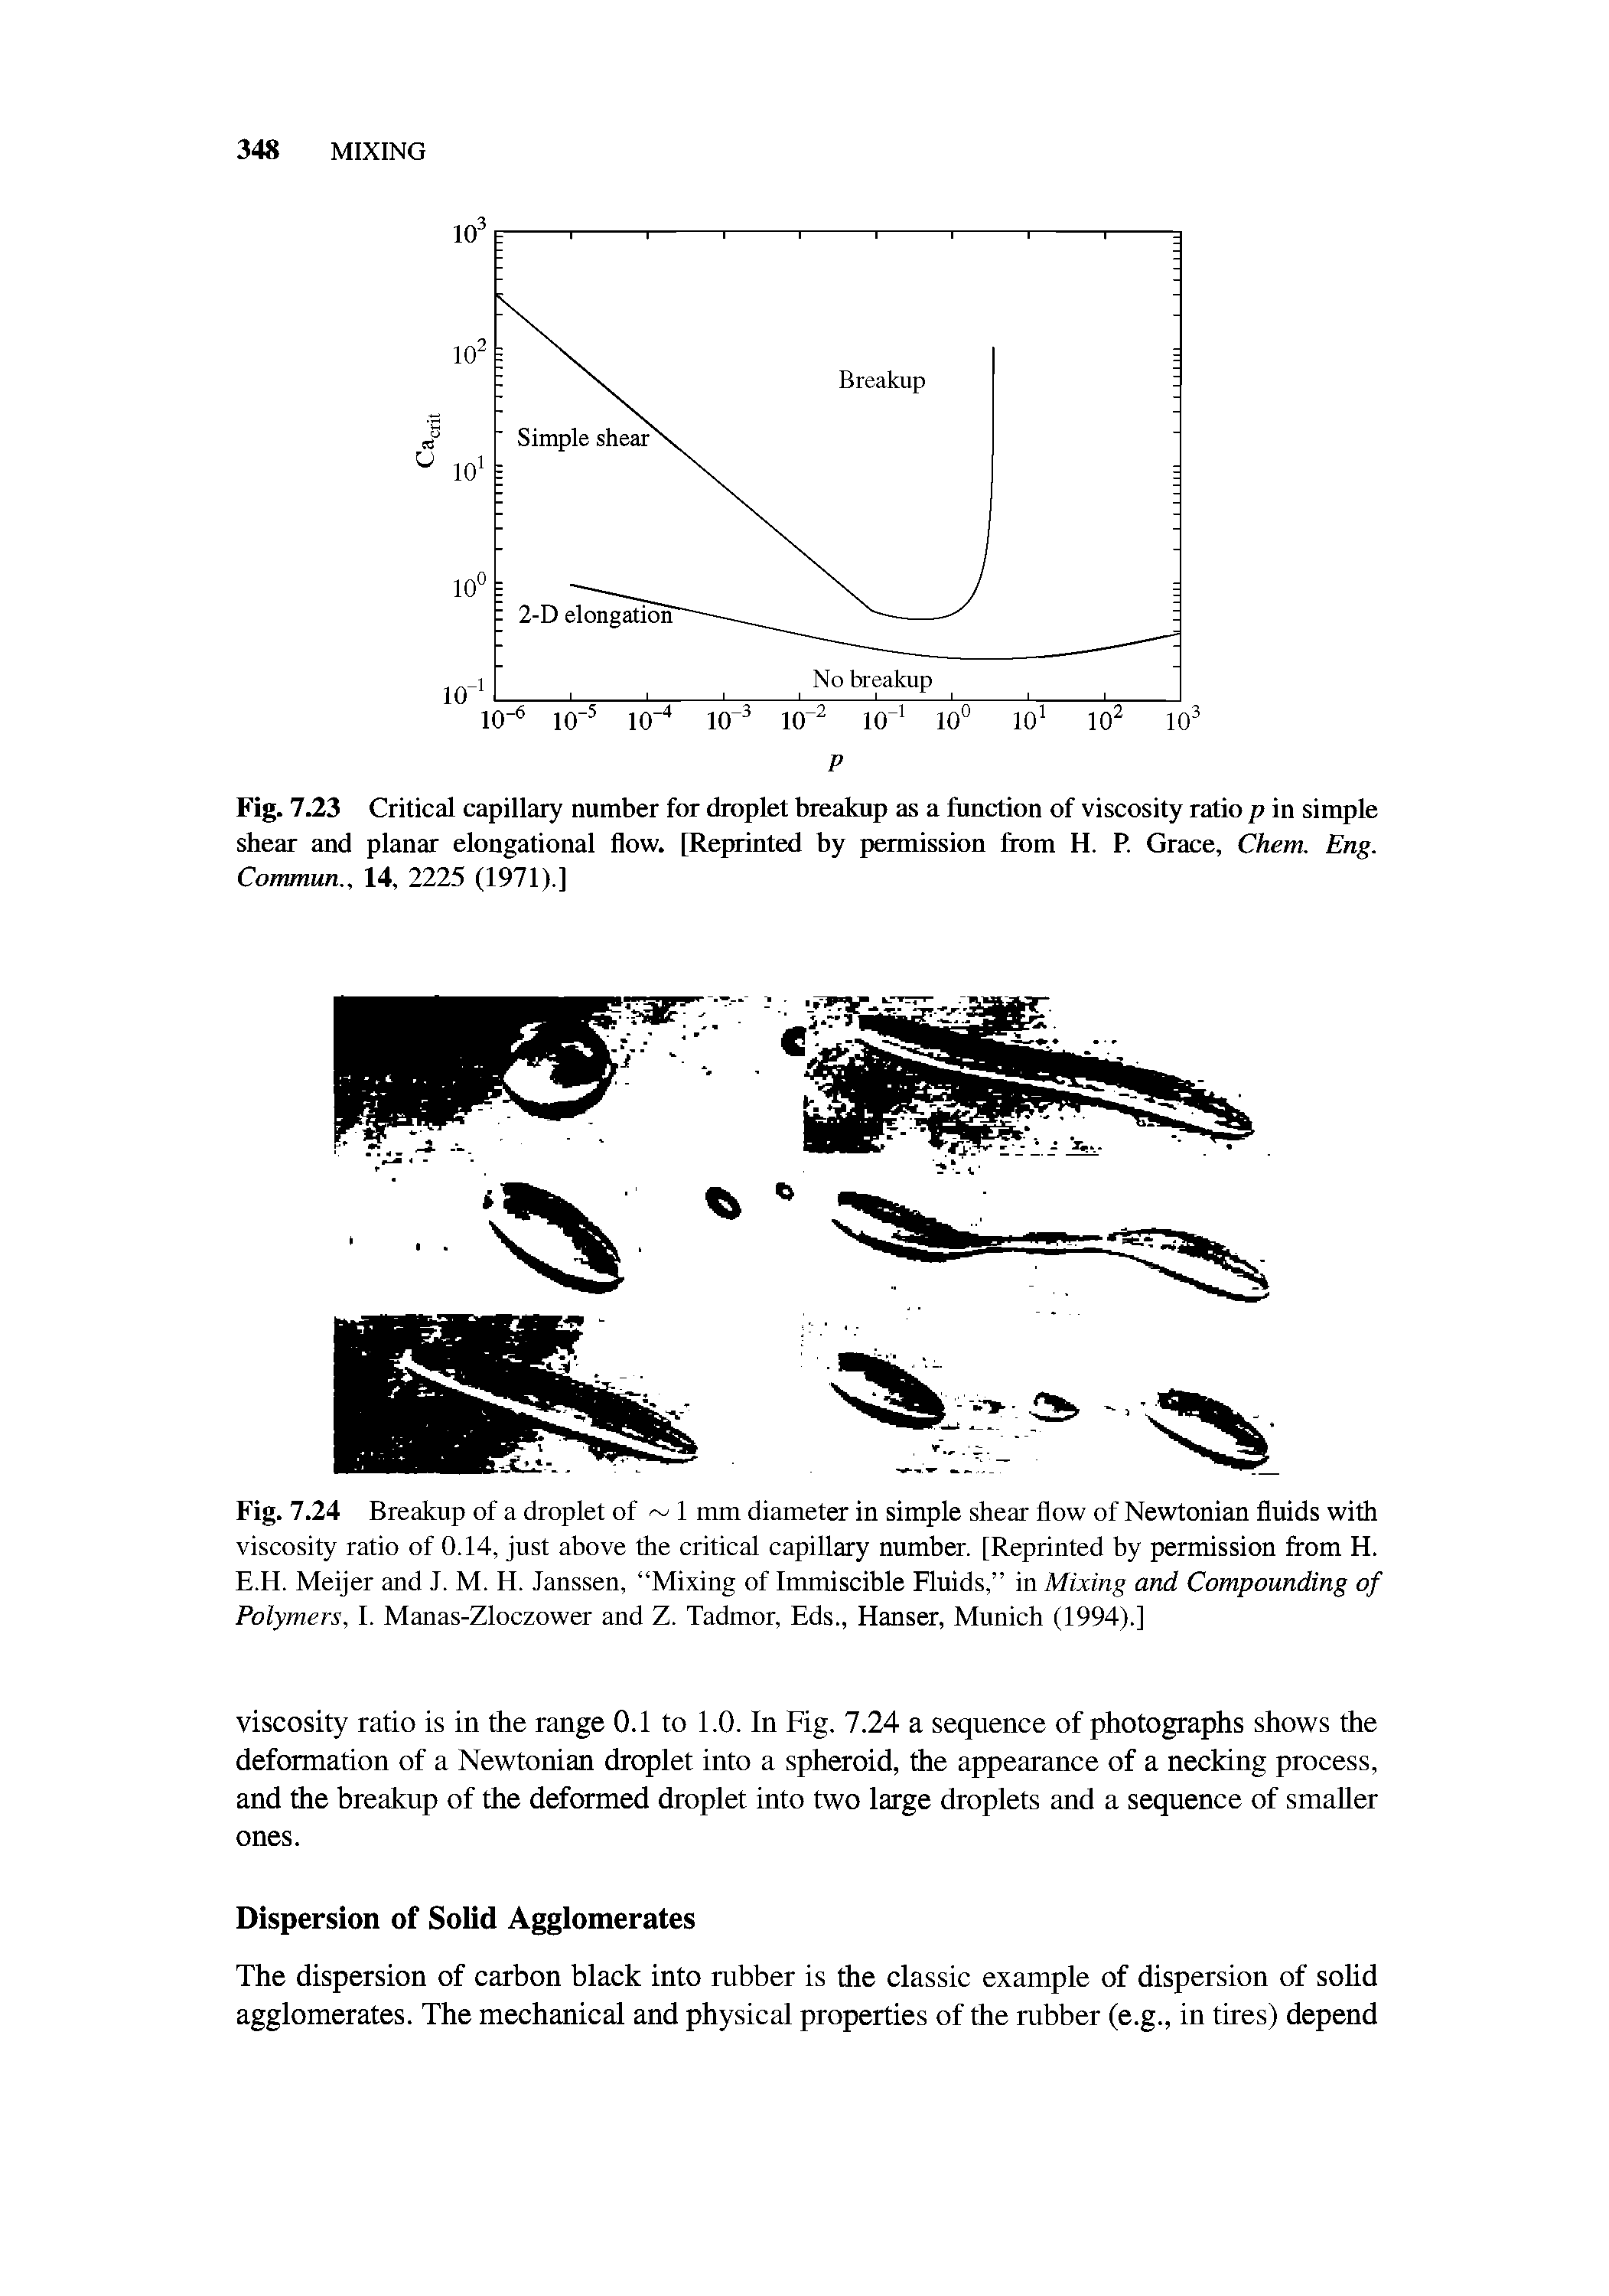 Fig. 7.24 Breakup of a droplet of 1 mm diameter in simple shear flow of Newtonian fluids with viscosity ratio of 0.14, just above the critical capillary number. [Reprinted by permission from H. E.H. Meijer and J. M. H. Janssen, Mixing of Immiscible Fluids, in Mixing and Compounding of Polymers, I. Manas-Zloczower and Z. Tadmor, Eds., Hanser, Munich (1994).]...